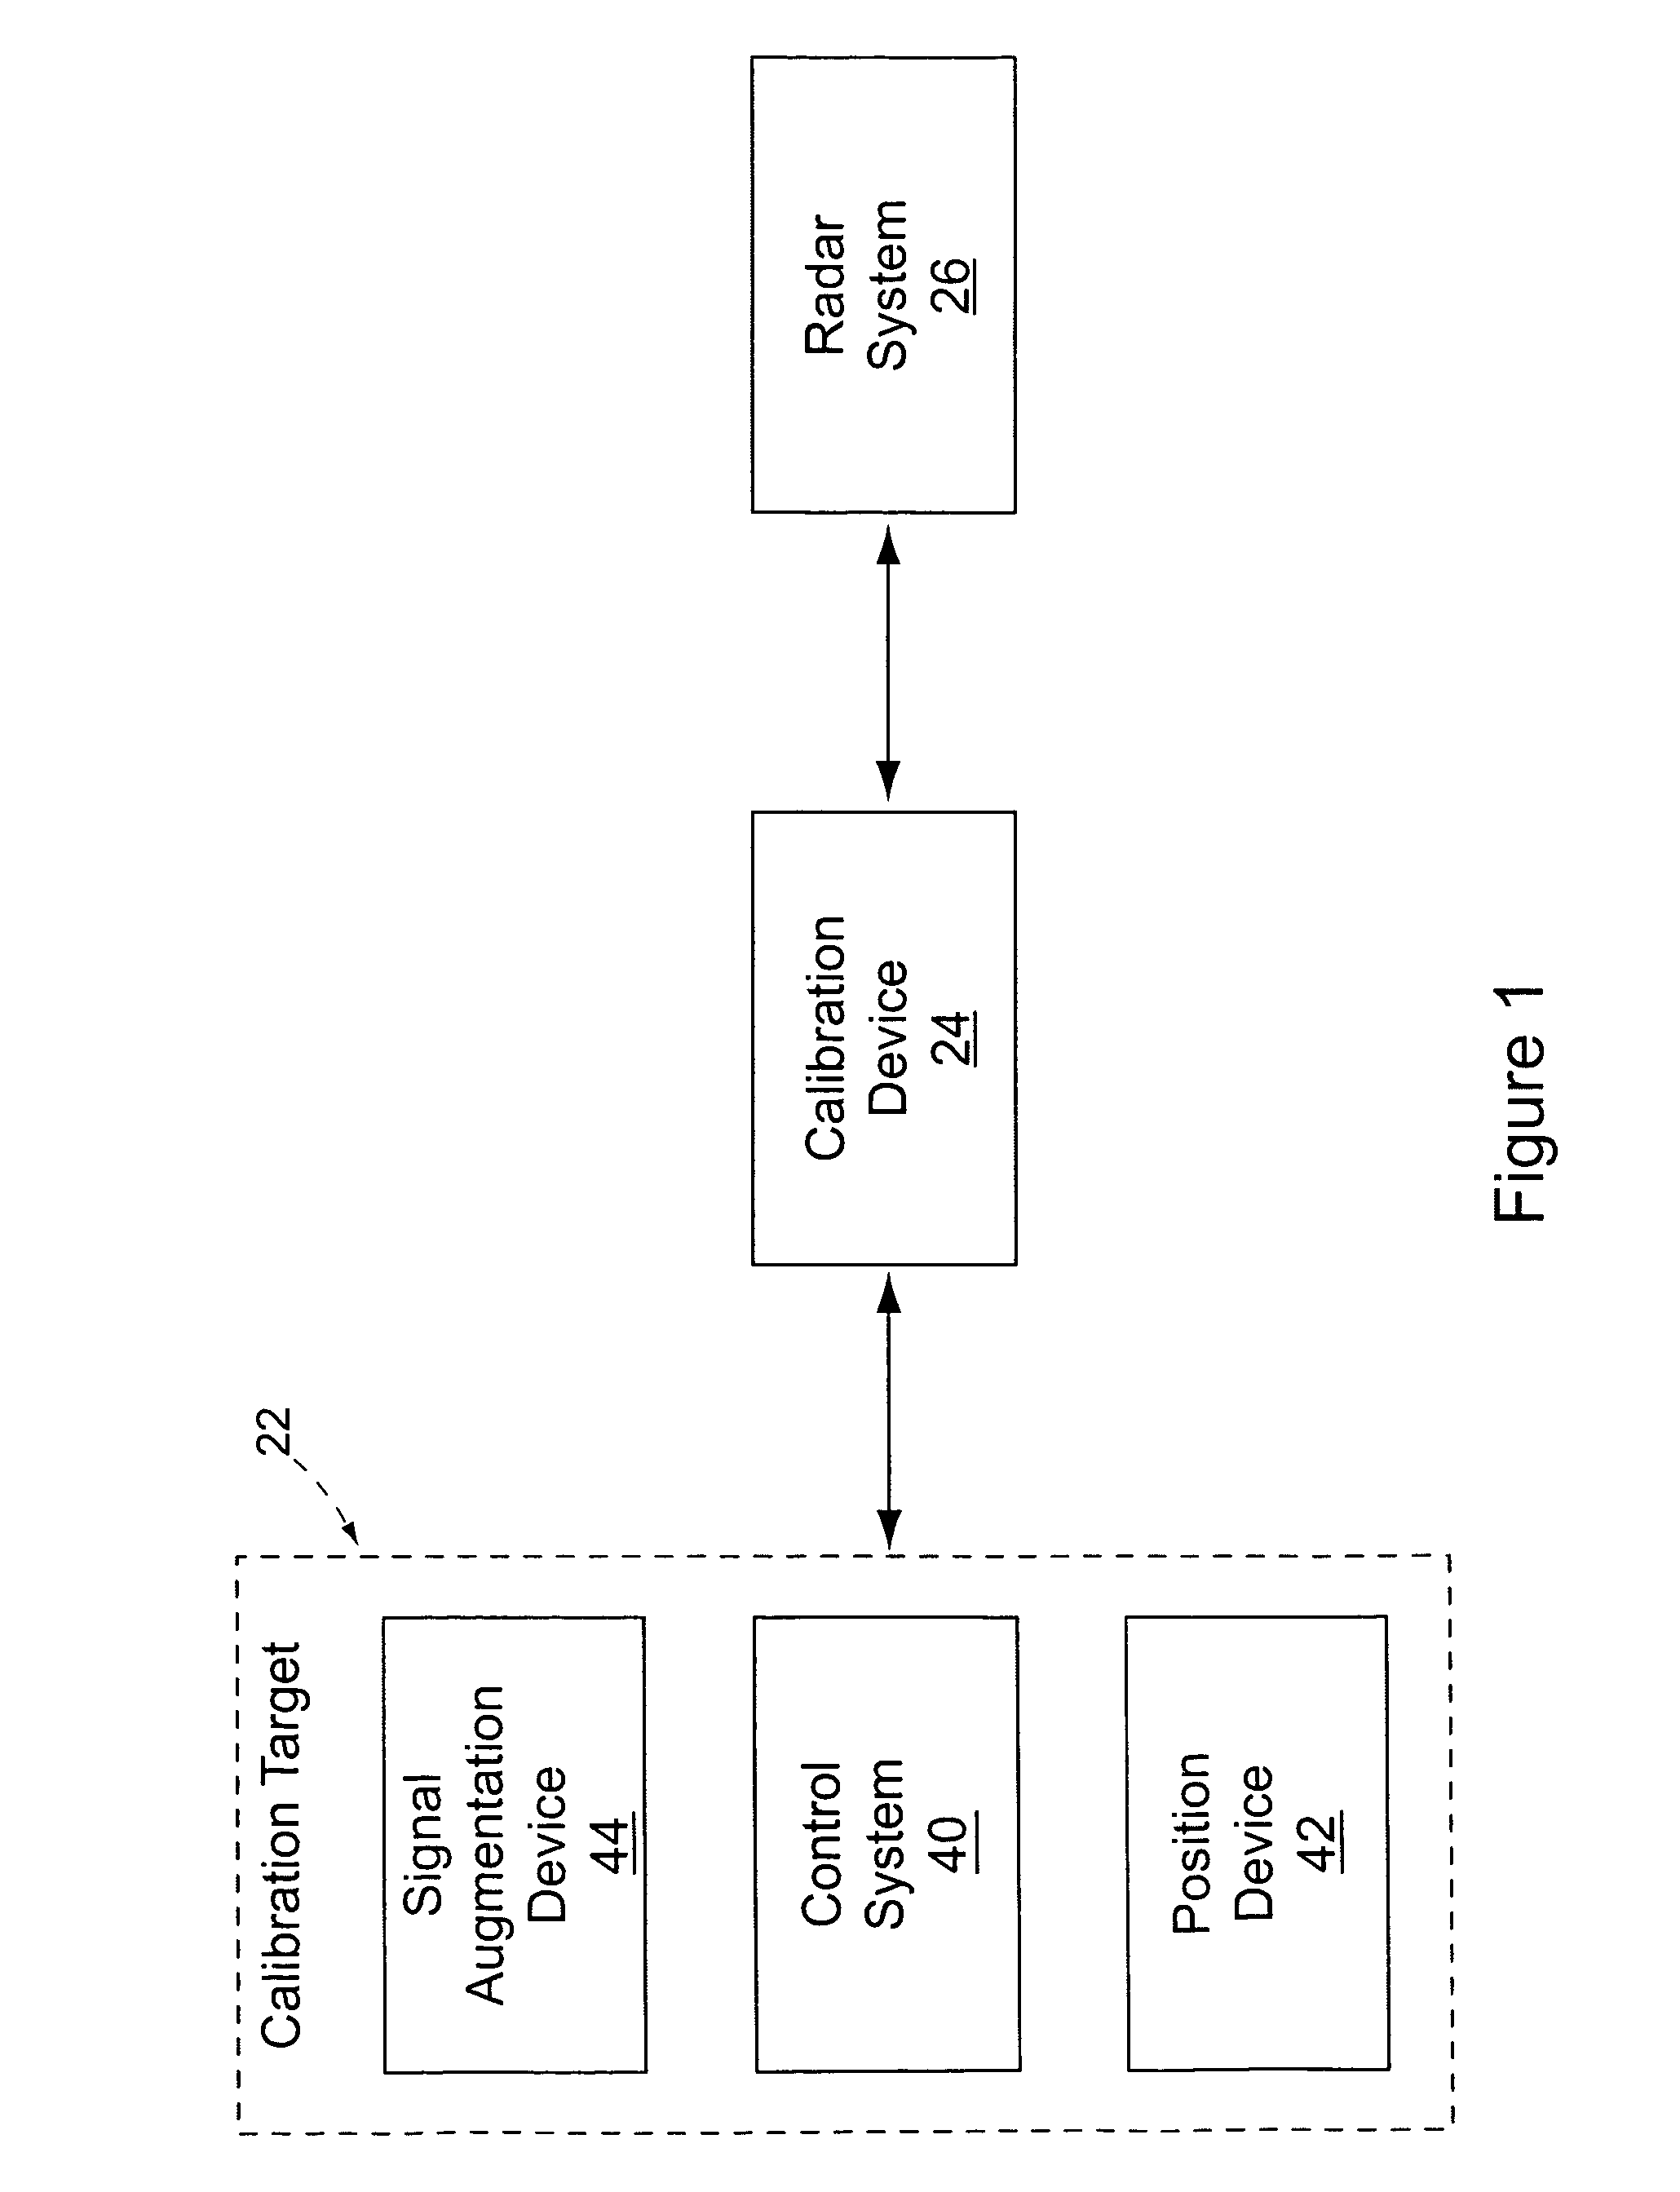 System and method for radar detection and calibration